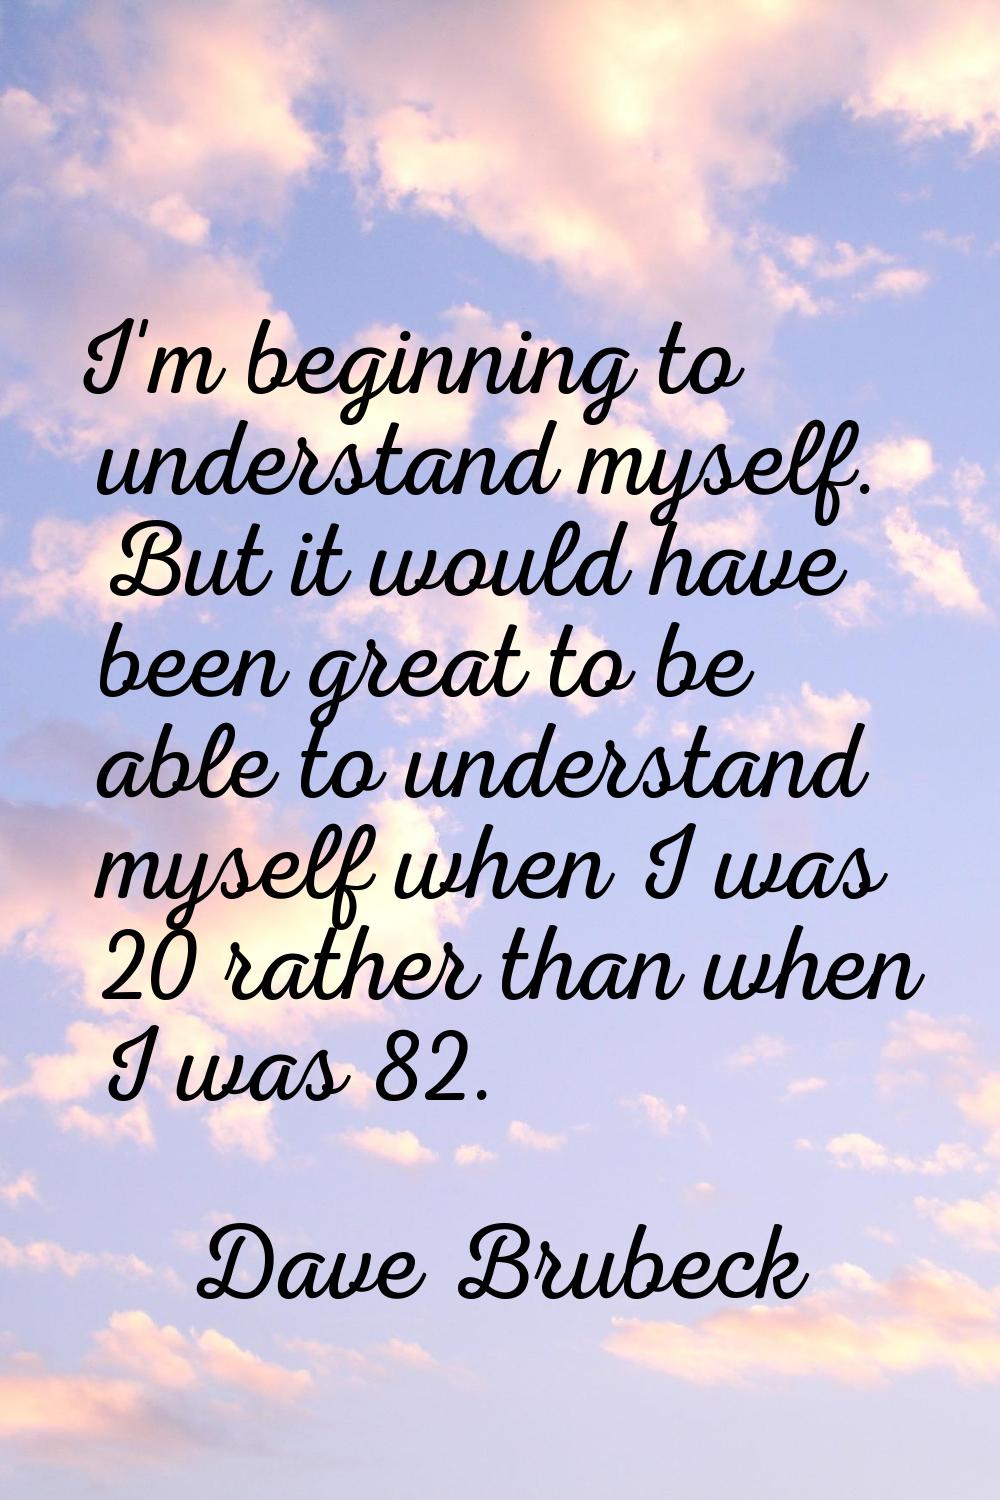 I'm beginning to understand myself. But it would have been great to be able to understand myself wh